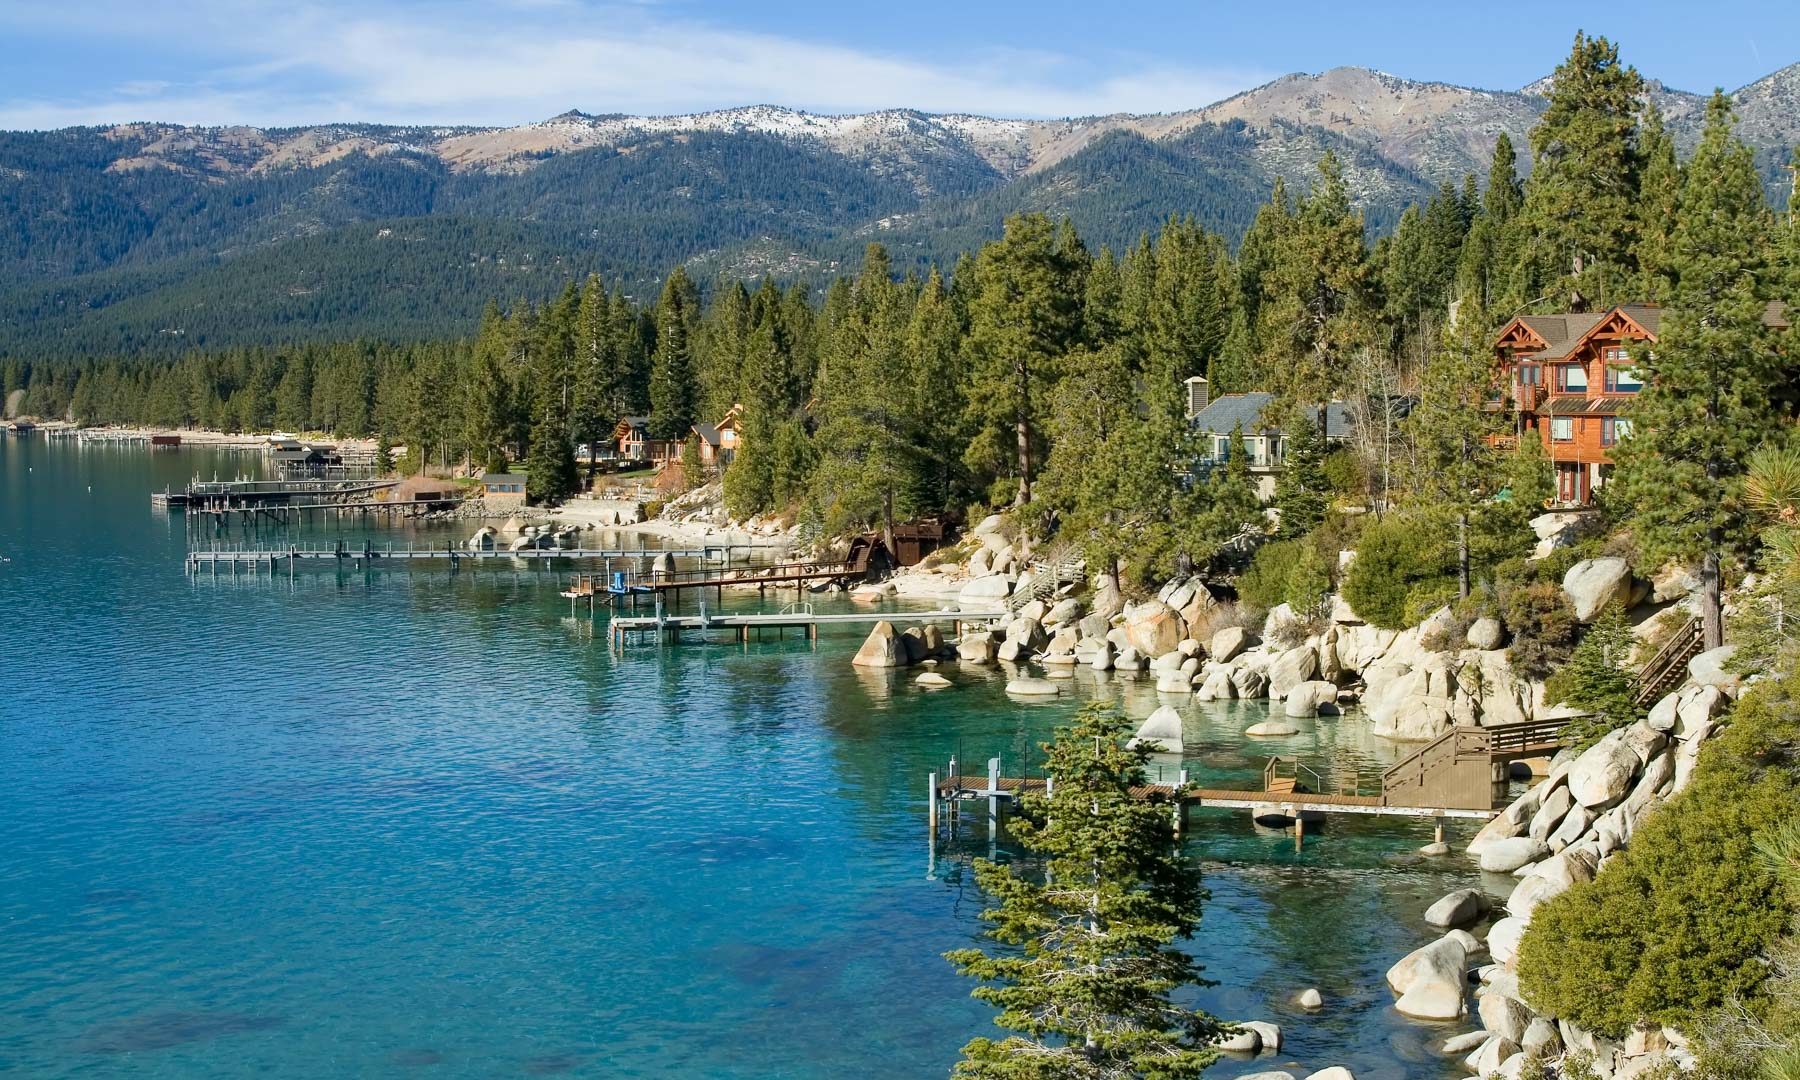 Best Boutique Hotels in South Lake Tahoe, California